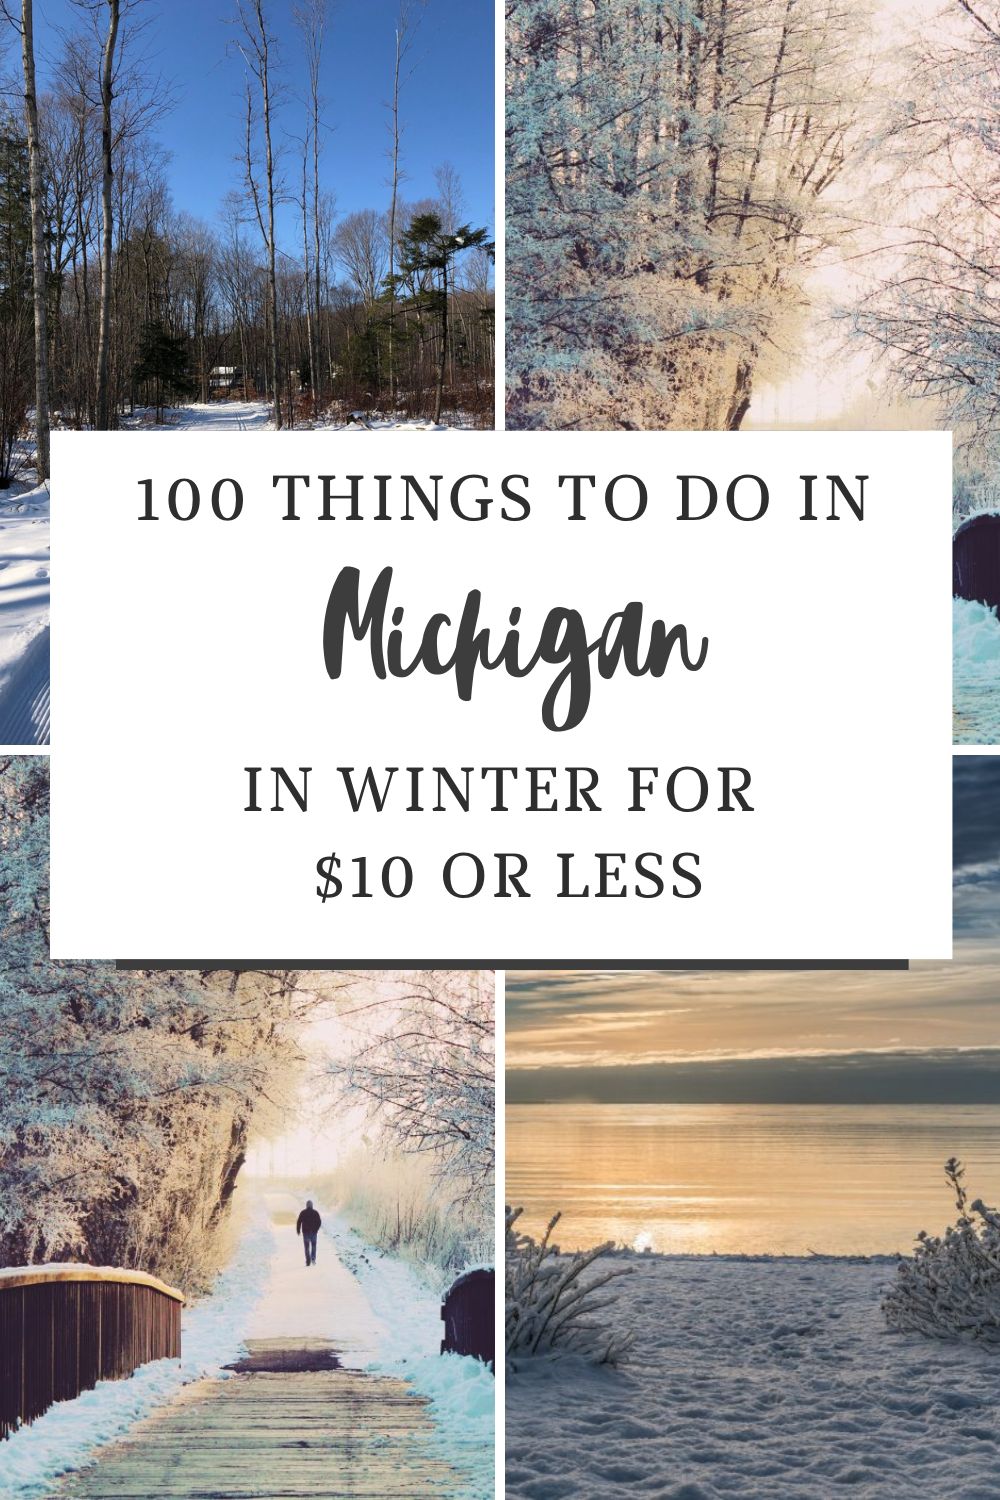 100 Things To Do In Michigan in the Winter